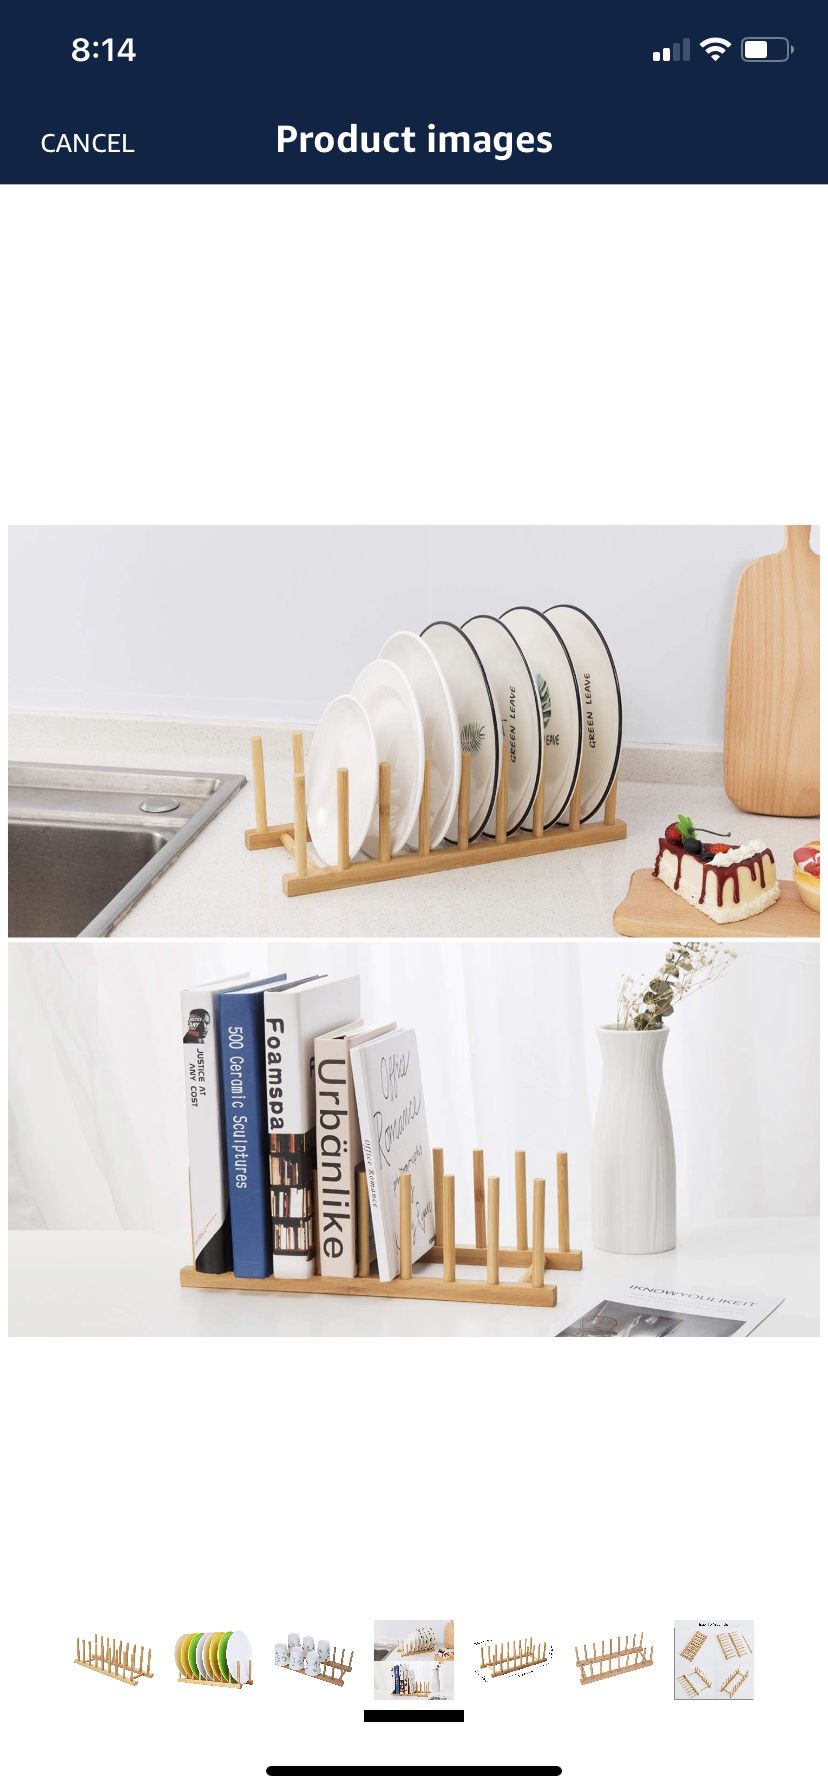 Bamboo Storage Holder Organizer- Multiple uses- 3 new in package.